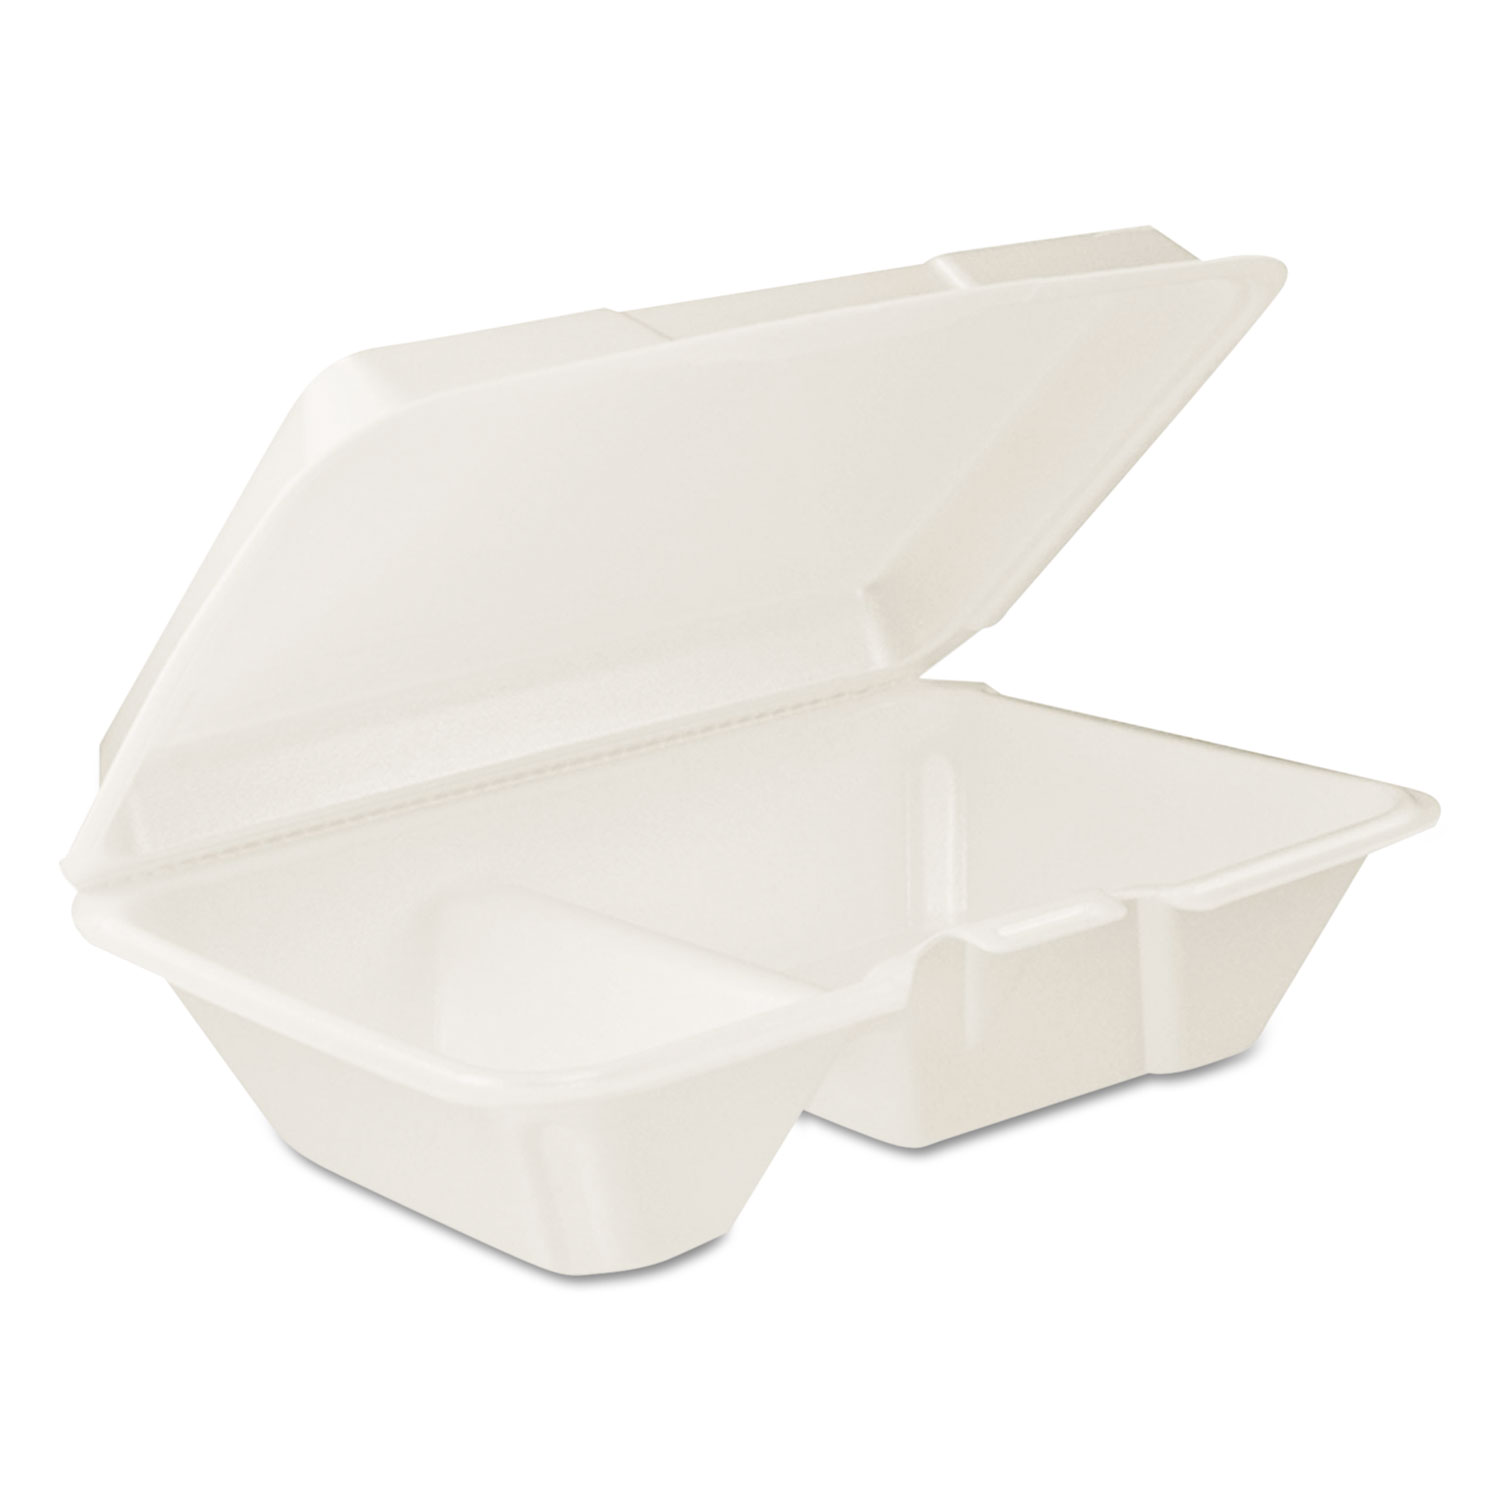  Dart 205HT2 Hinged Lid Carryout Container, White, 9 1/3 x 2 9/10 x 6 2/5, 100/BG, 2 BG/CT (DCC205HT2) 